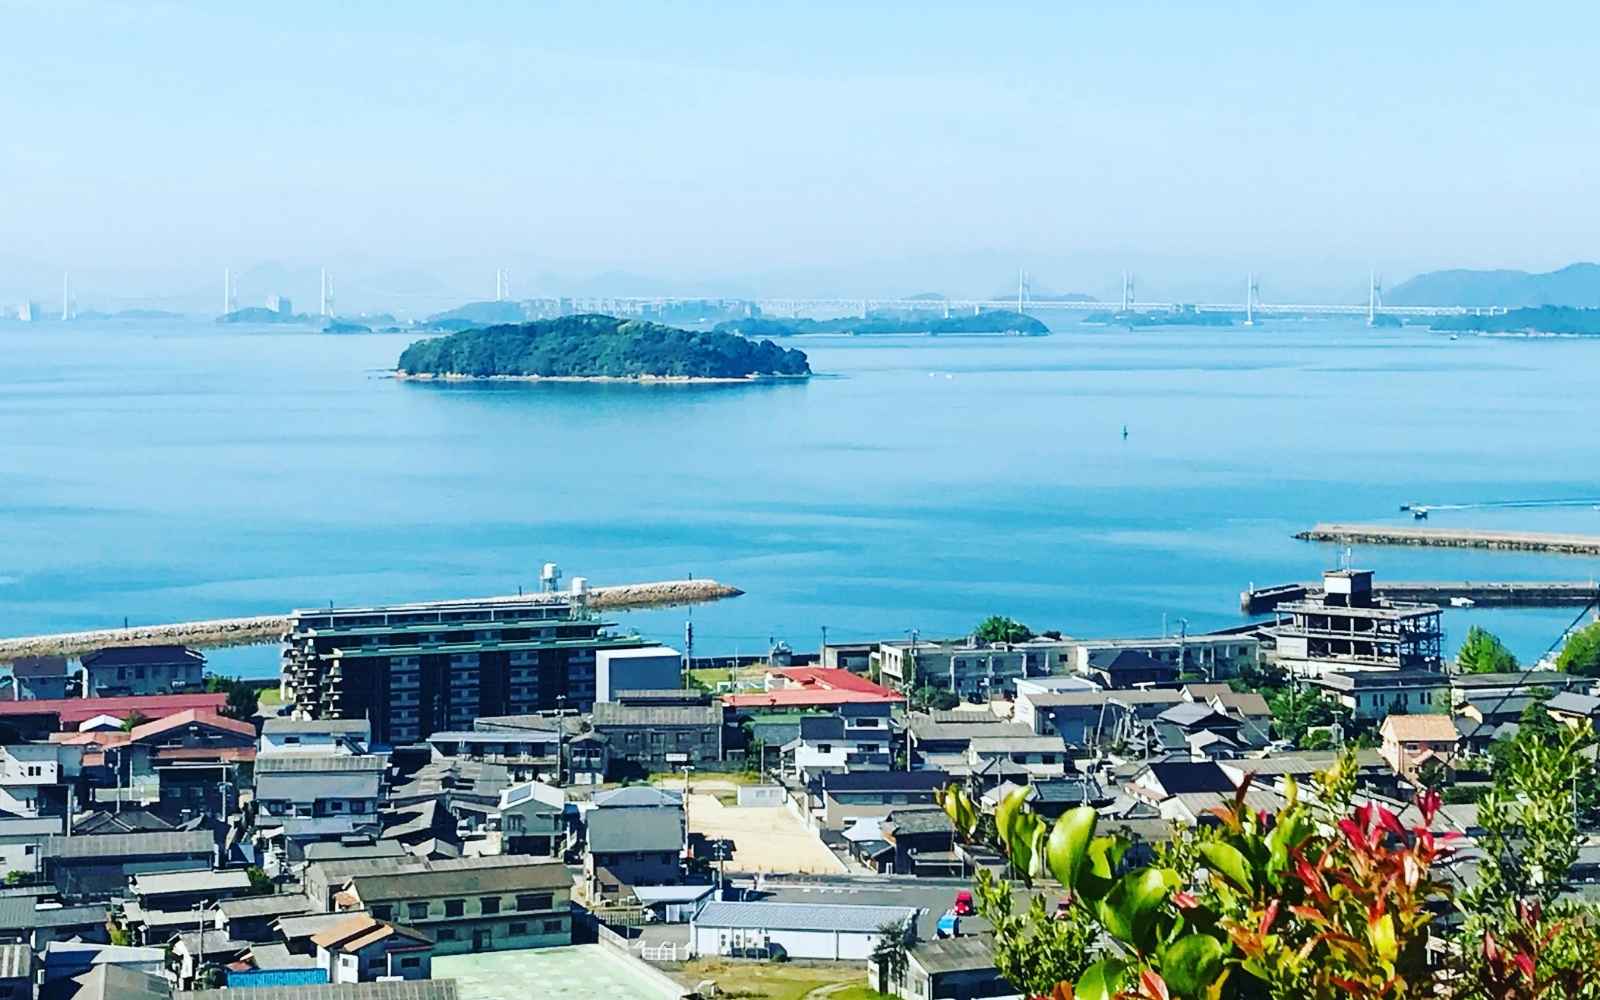 A view of Karakoto Kojima, Kurashiki the town where we make our fabric. Woven in Japan at our family business. A  small town with many buildings nestled in a small area.  In the background the blue Setouchi Sea and the Seto Ohashi Bridge can be seen.  